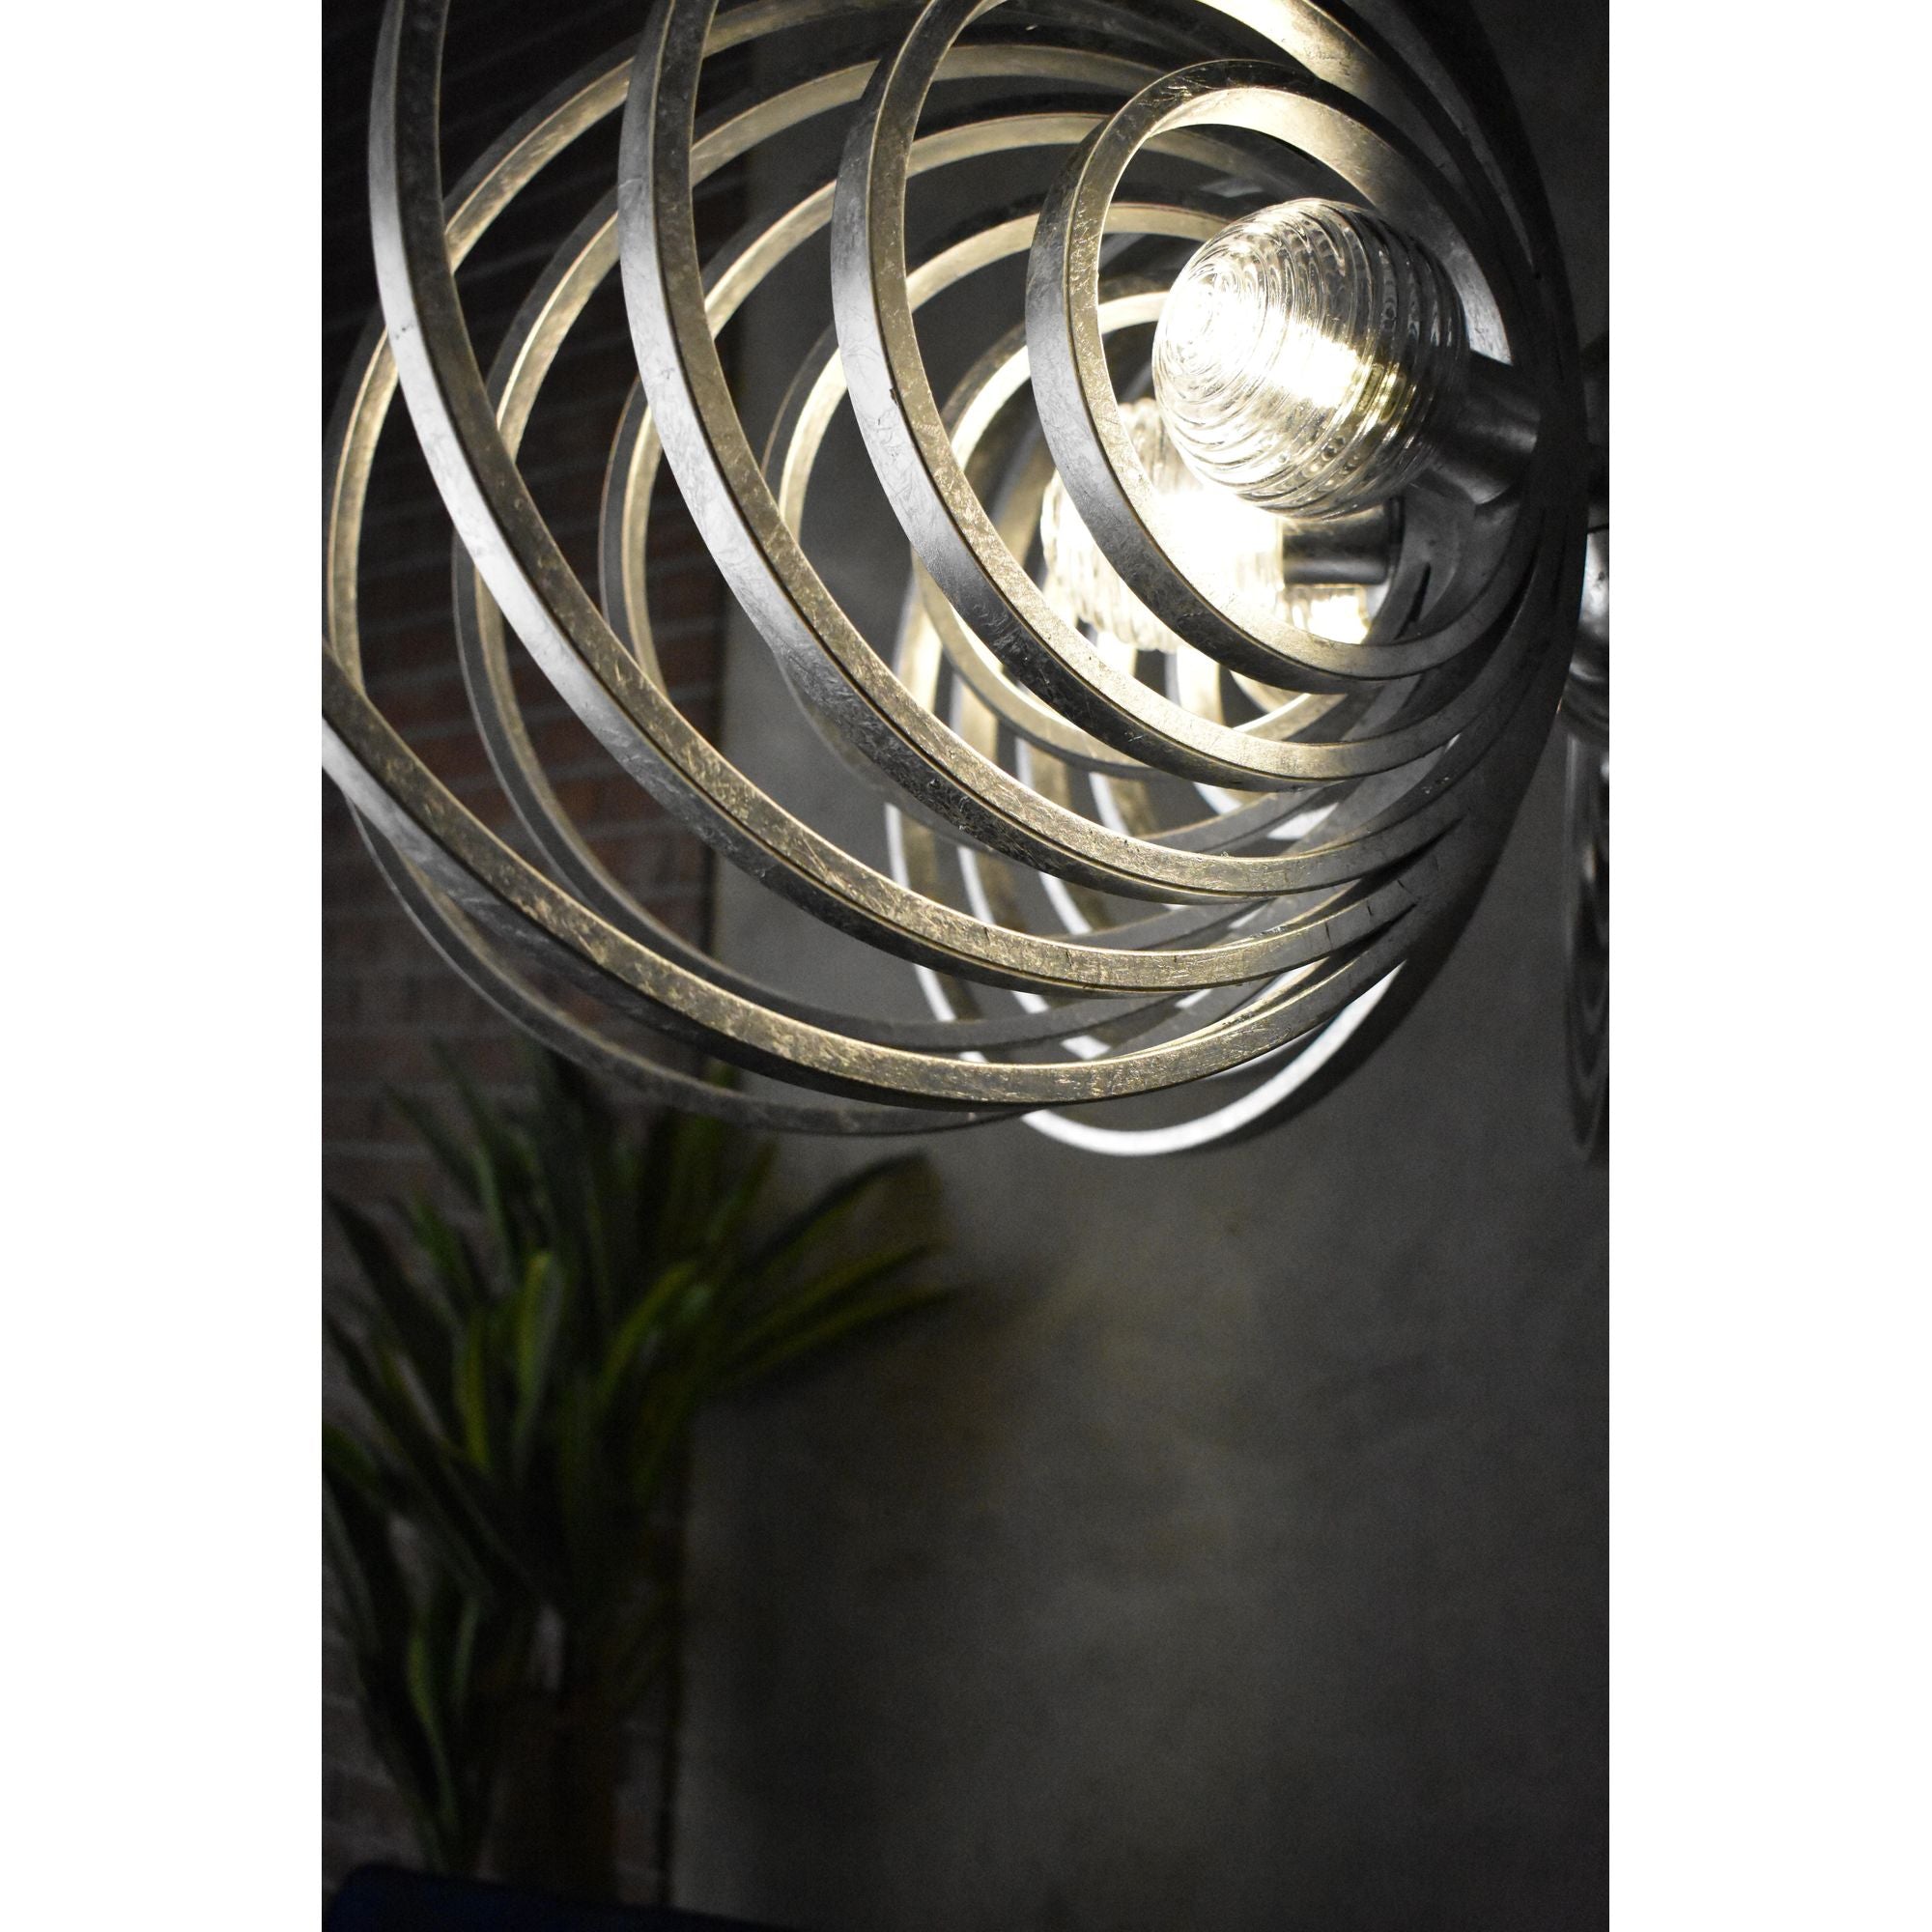 Studio M SM23638CRSL Frequency 8-Light Pendant in Silver Leaf